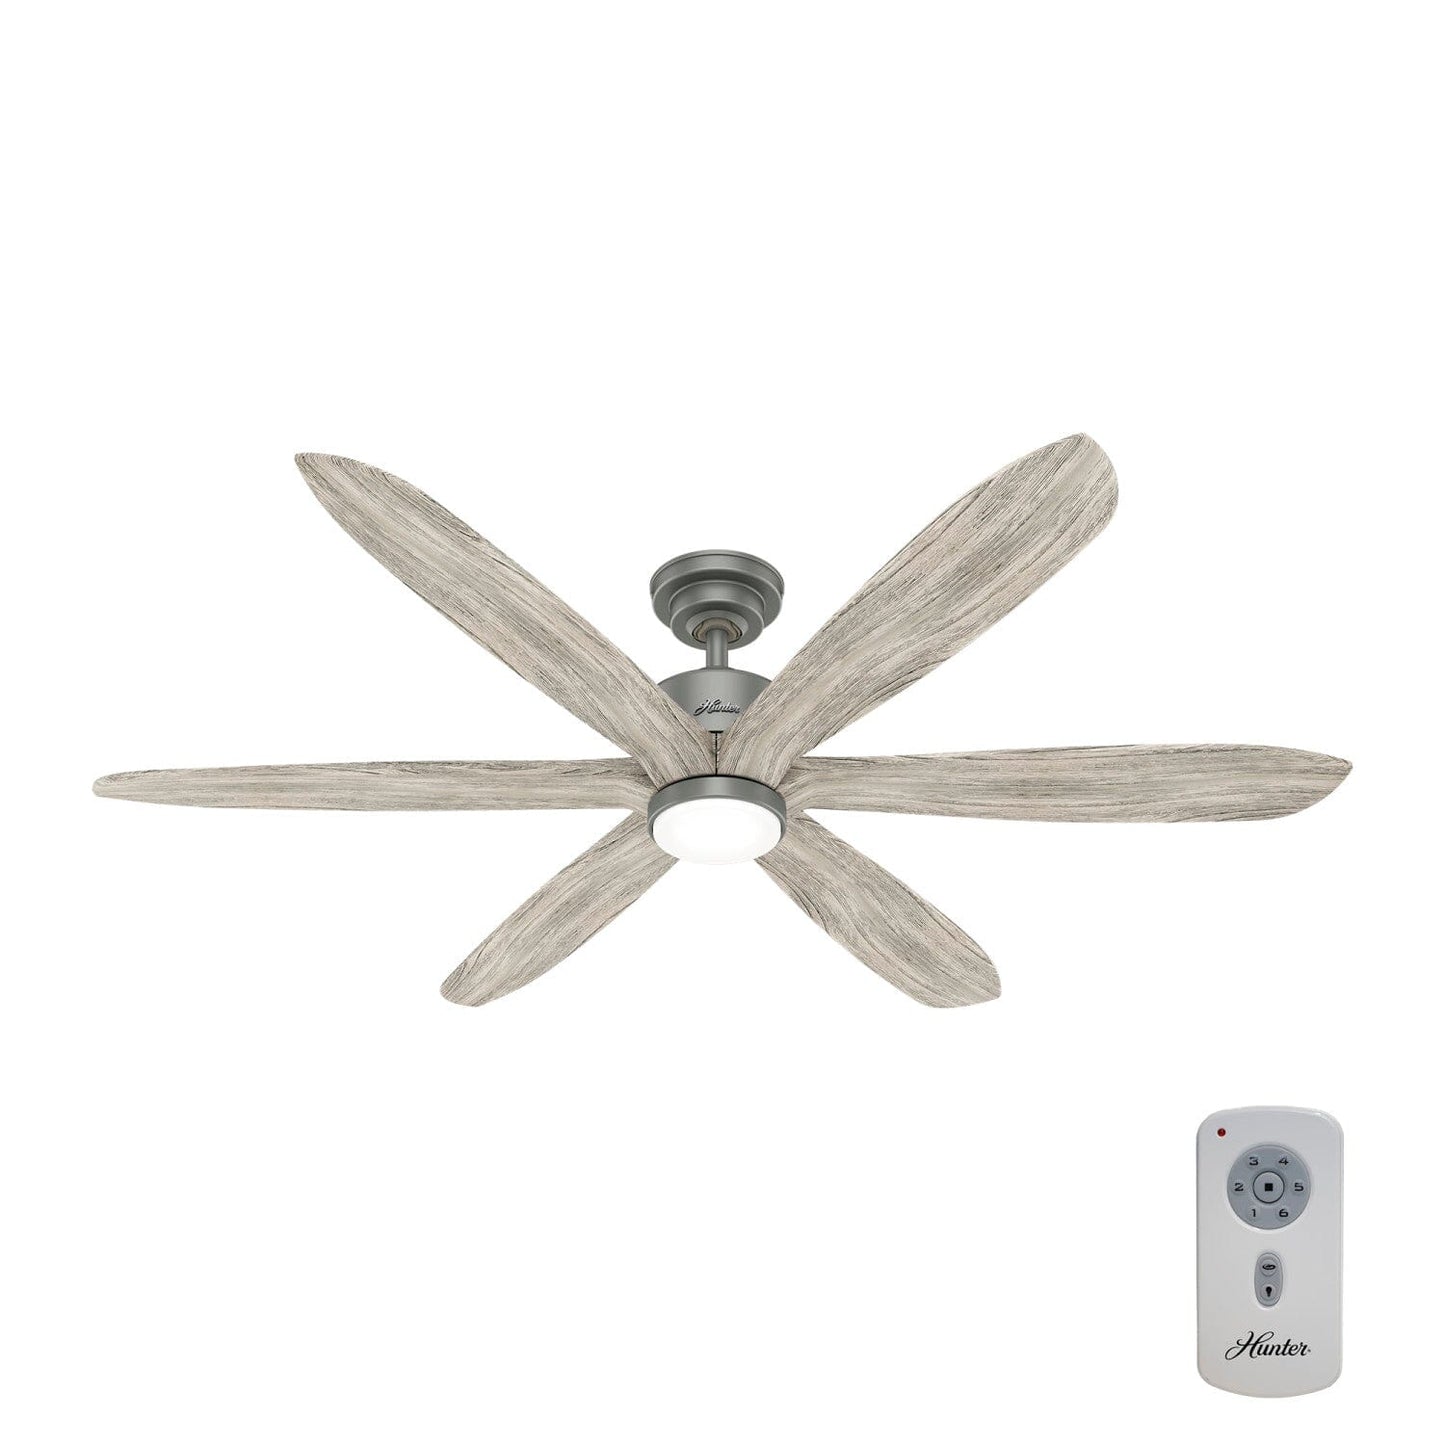 Rhinebeck with LED Light 58 inch Ceiling Fans Hunter Matte Silver - Weathered White Birch 